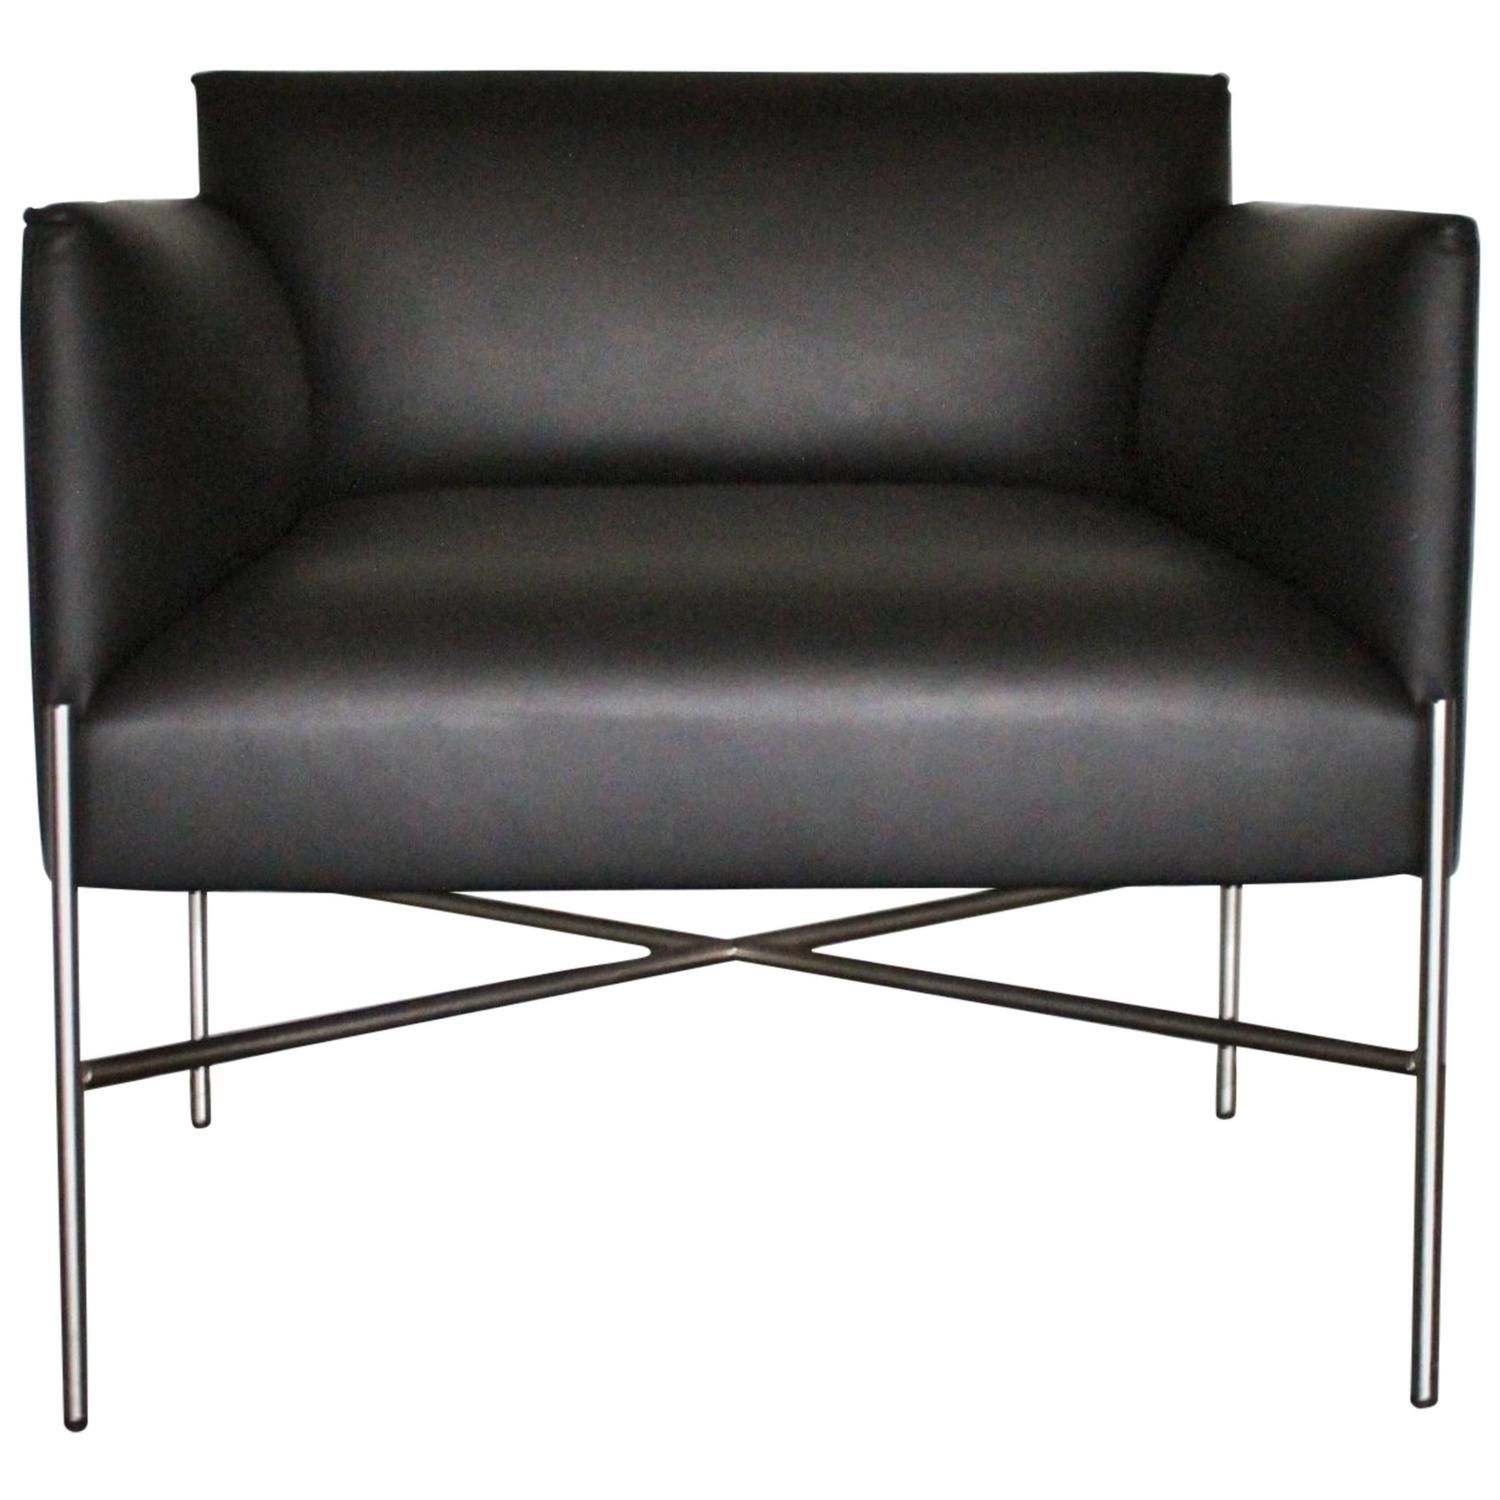 Chill–Out Armchair With Armrests Chromed Base Ochilp 70Vtacchini With Chill Swivel Chairs With Metal Base (View 20 of 25)